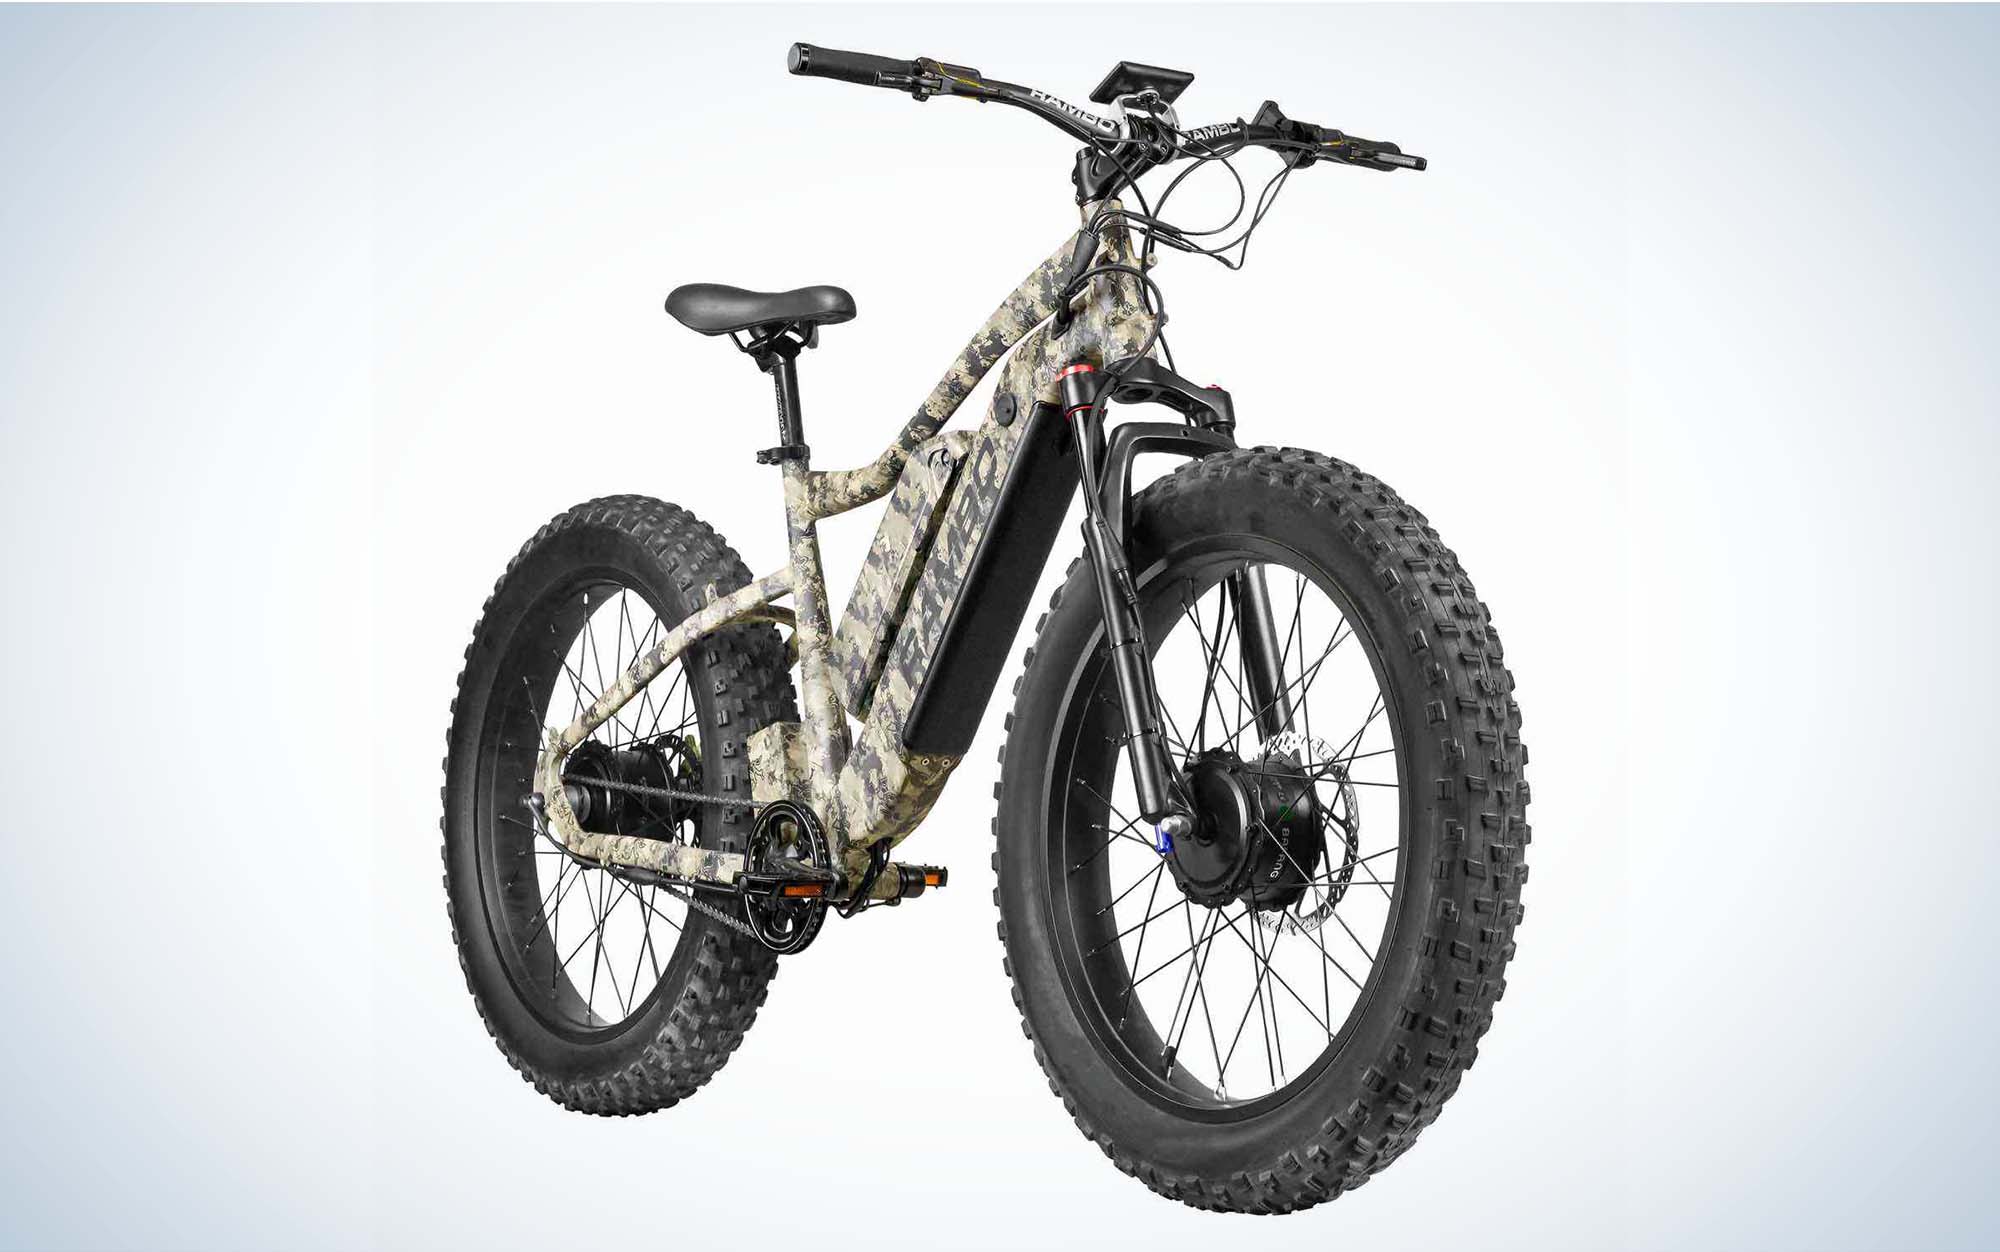 The Rambo Megatron is the best ebike for long distances.